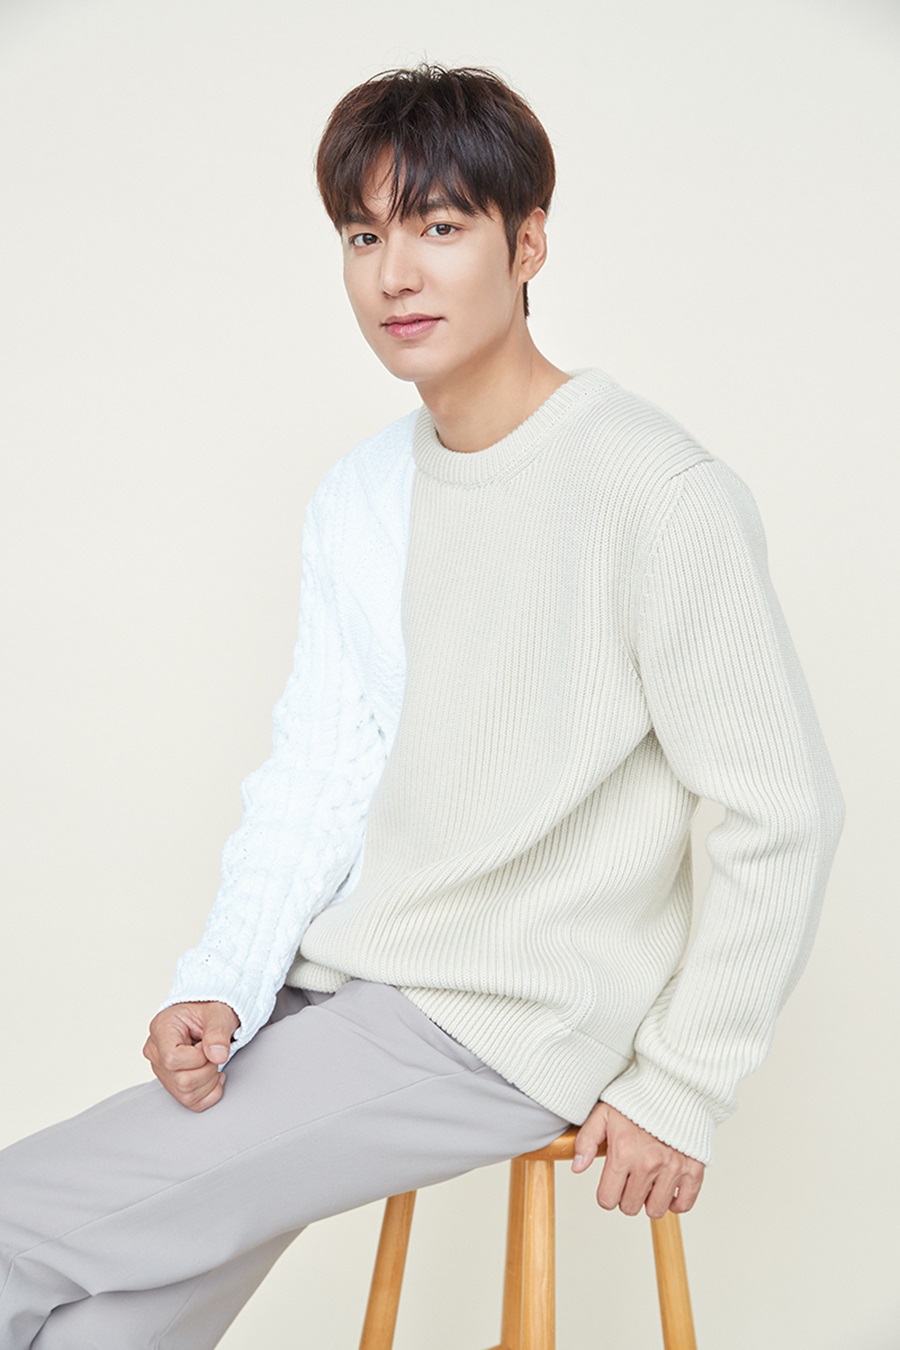 ▲ Lee Min-ho. Provided by MYM Entertainment